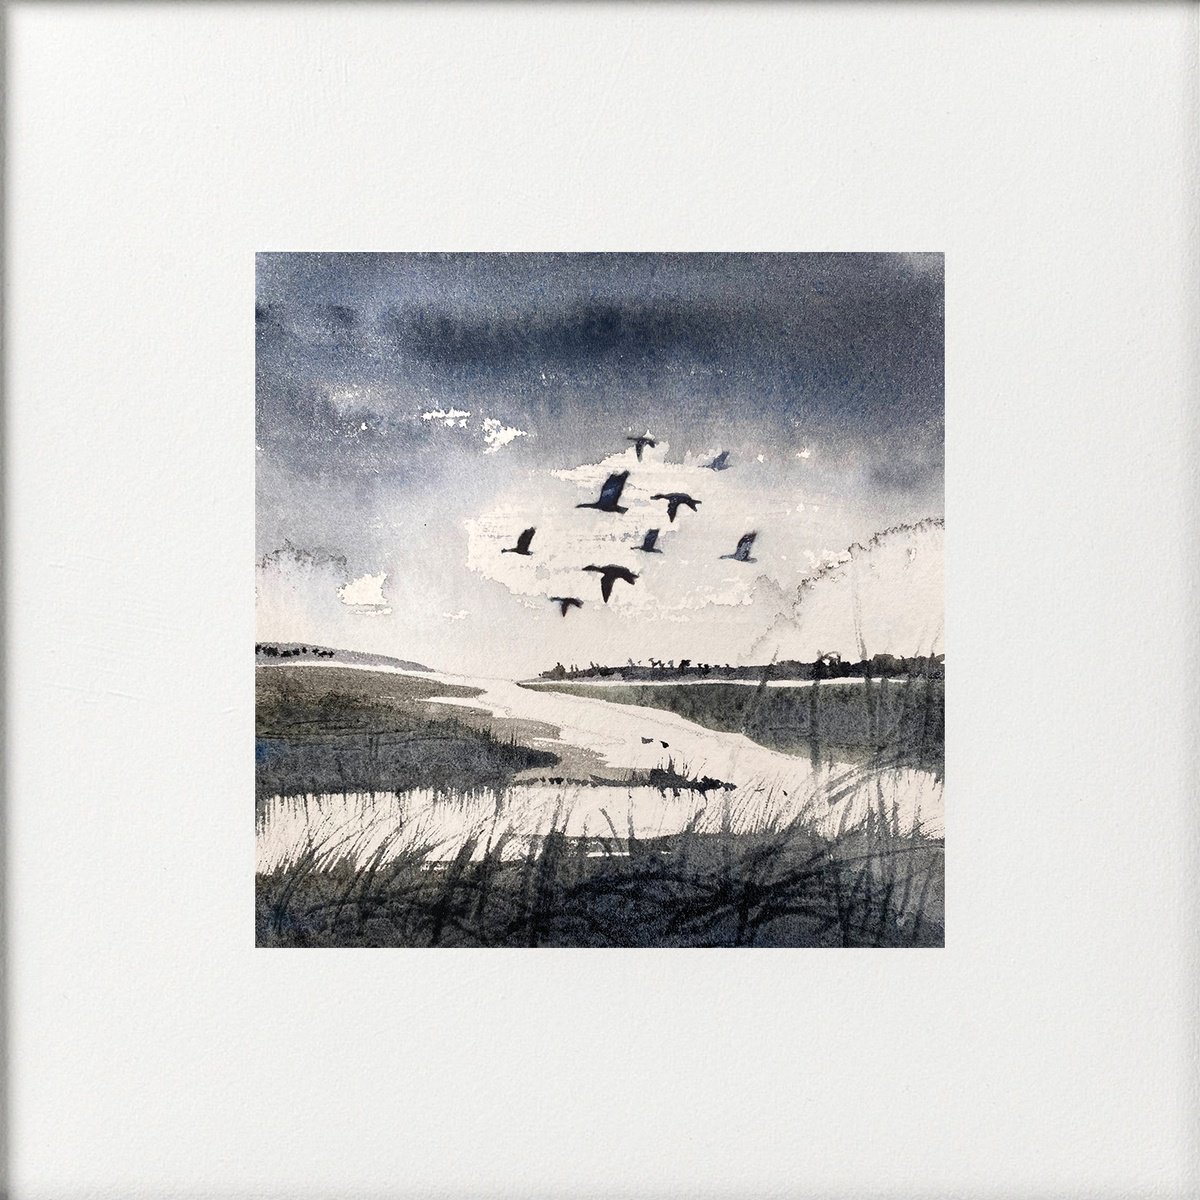 Monochrome - Flock of Geese over Wetlands by Teresa Tanner